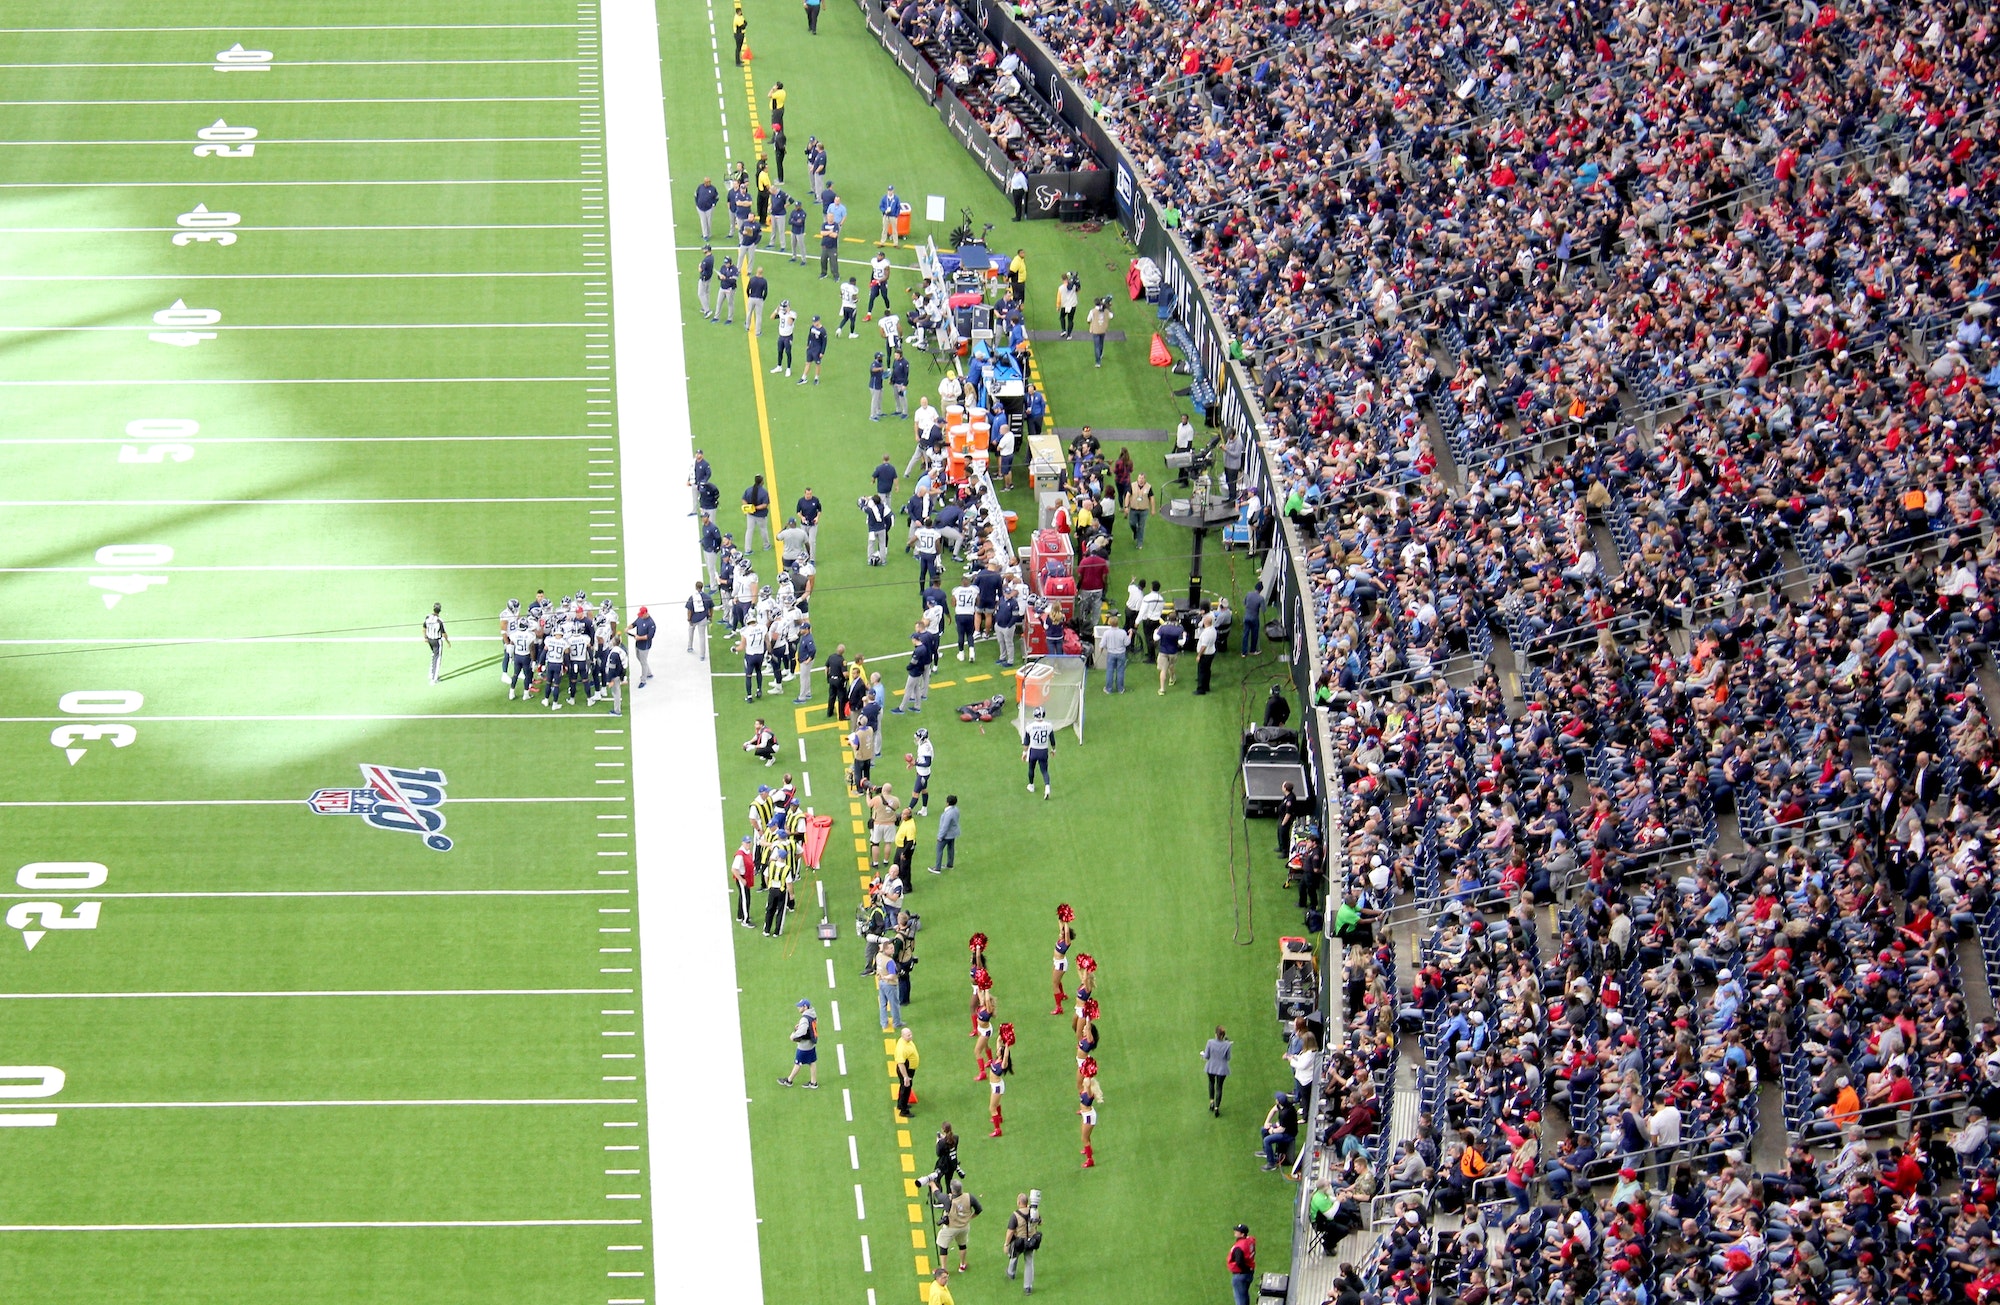 An audience of sports fans watching an NFL football game in a stadium